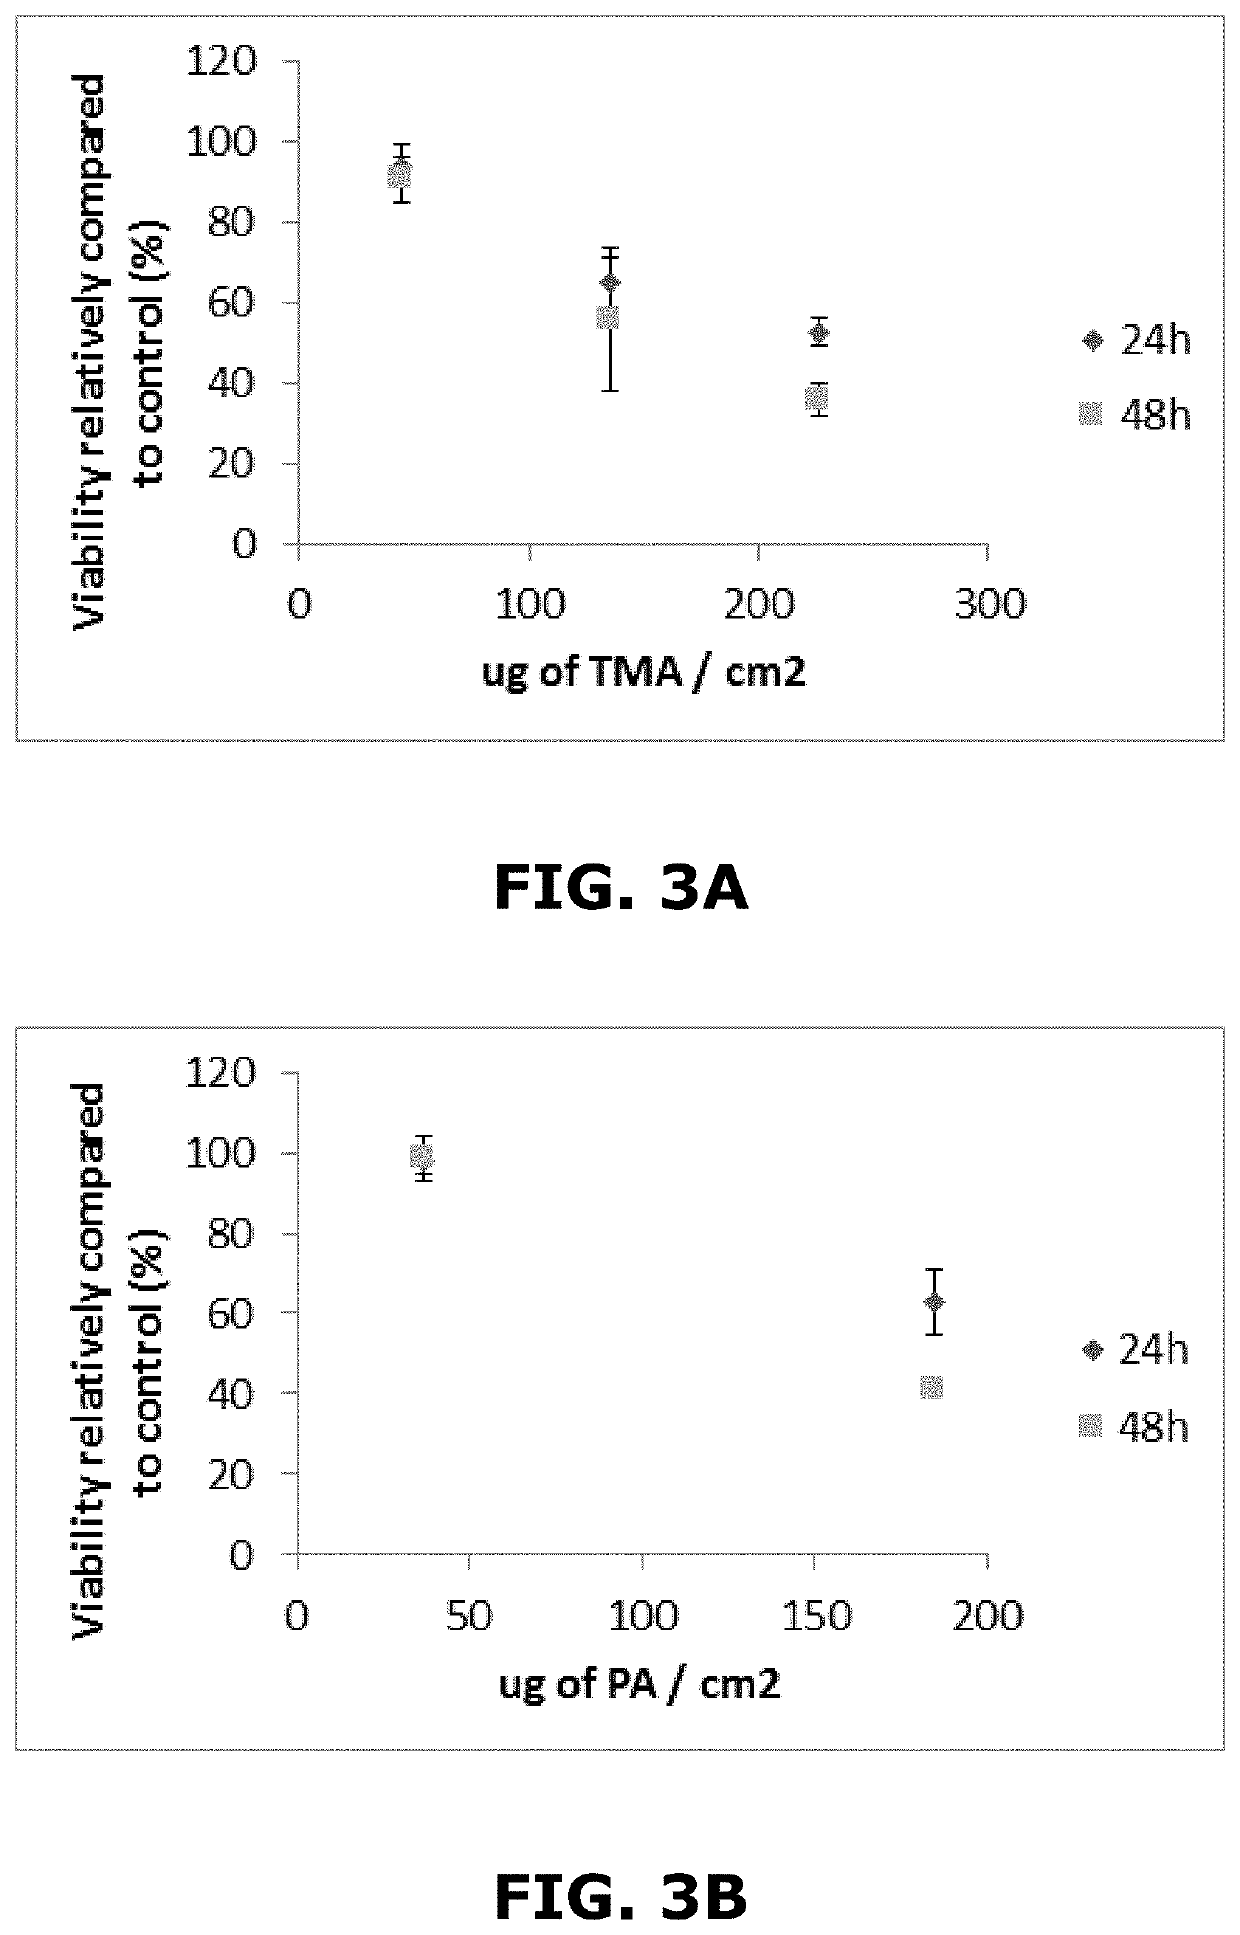 Three-dimensional in vitro lung model, process for preparing said model, and its use for determining and /or predicting the sensitizing effects of inhalable products